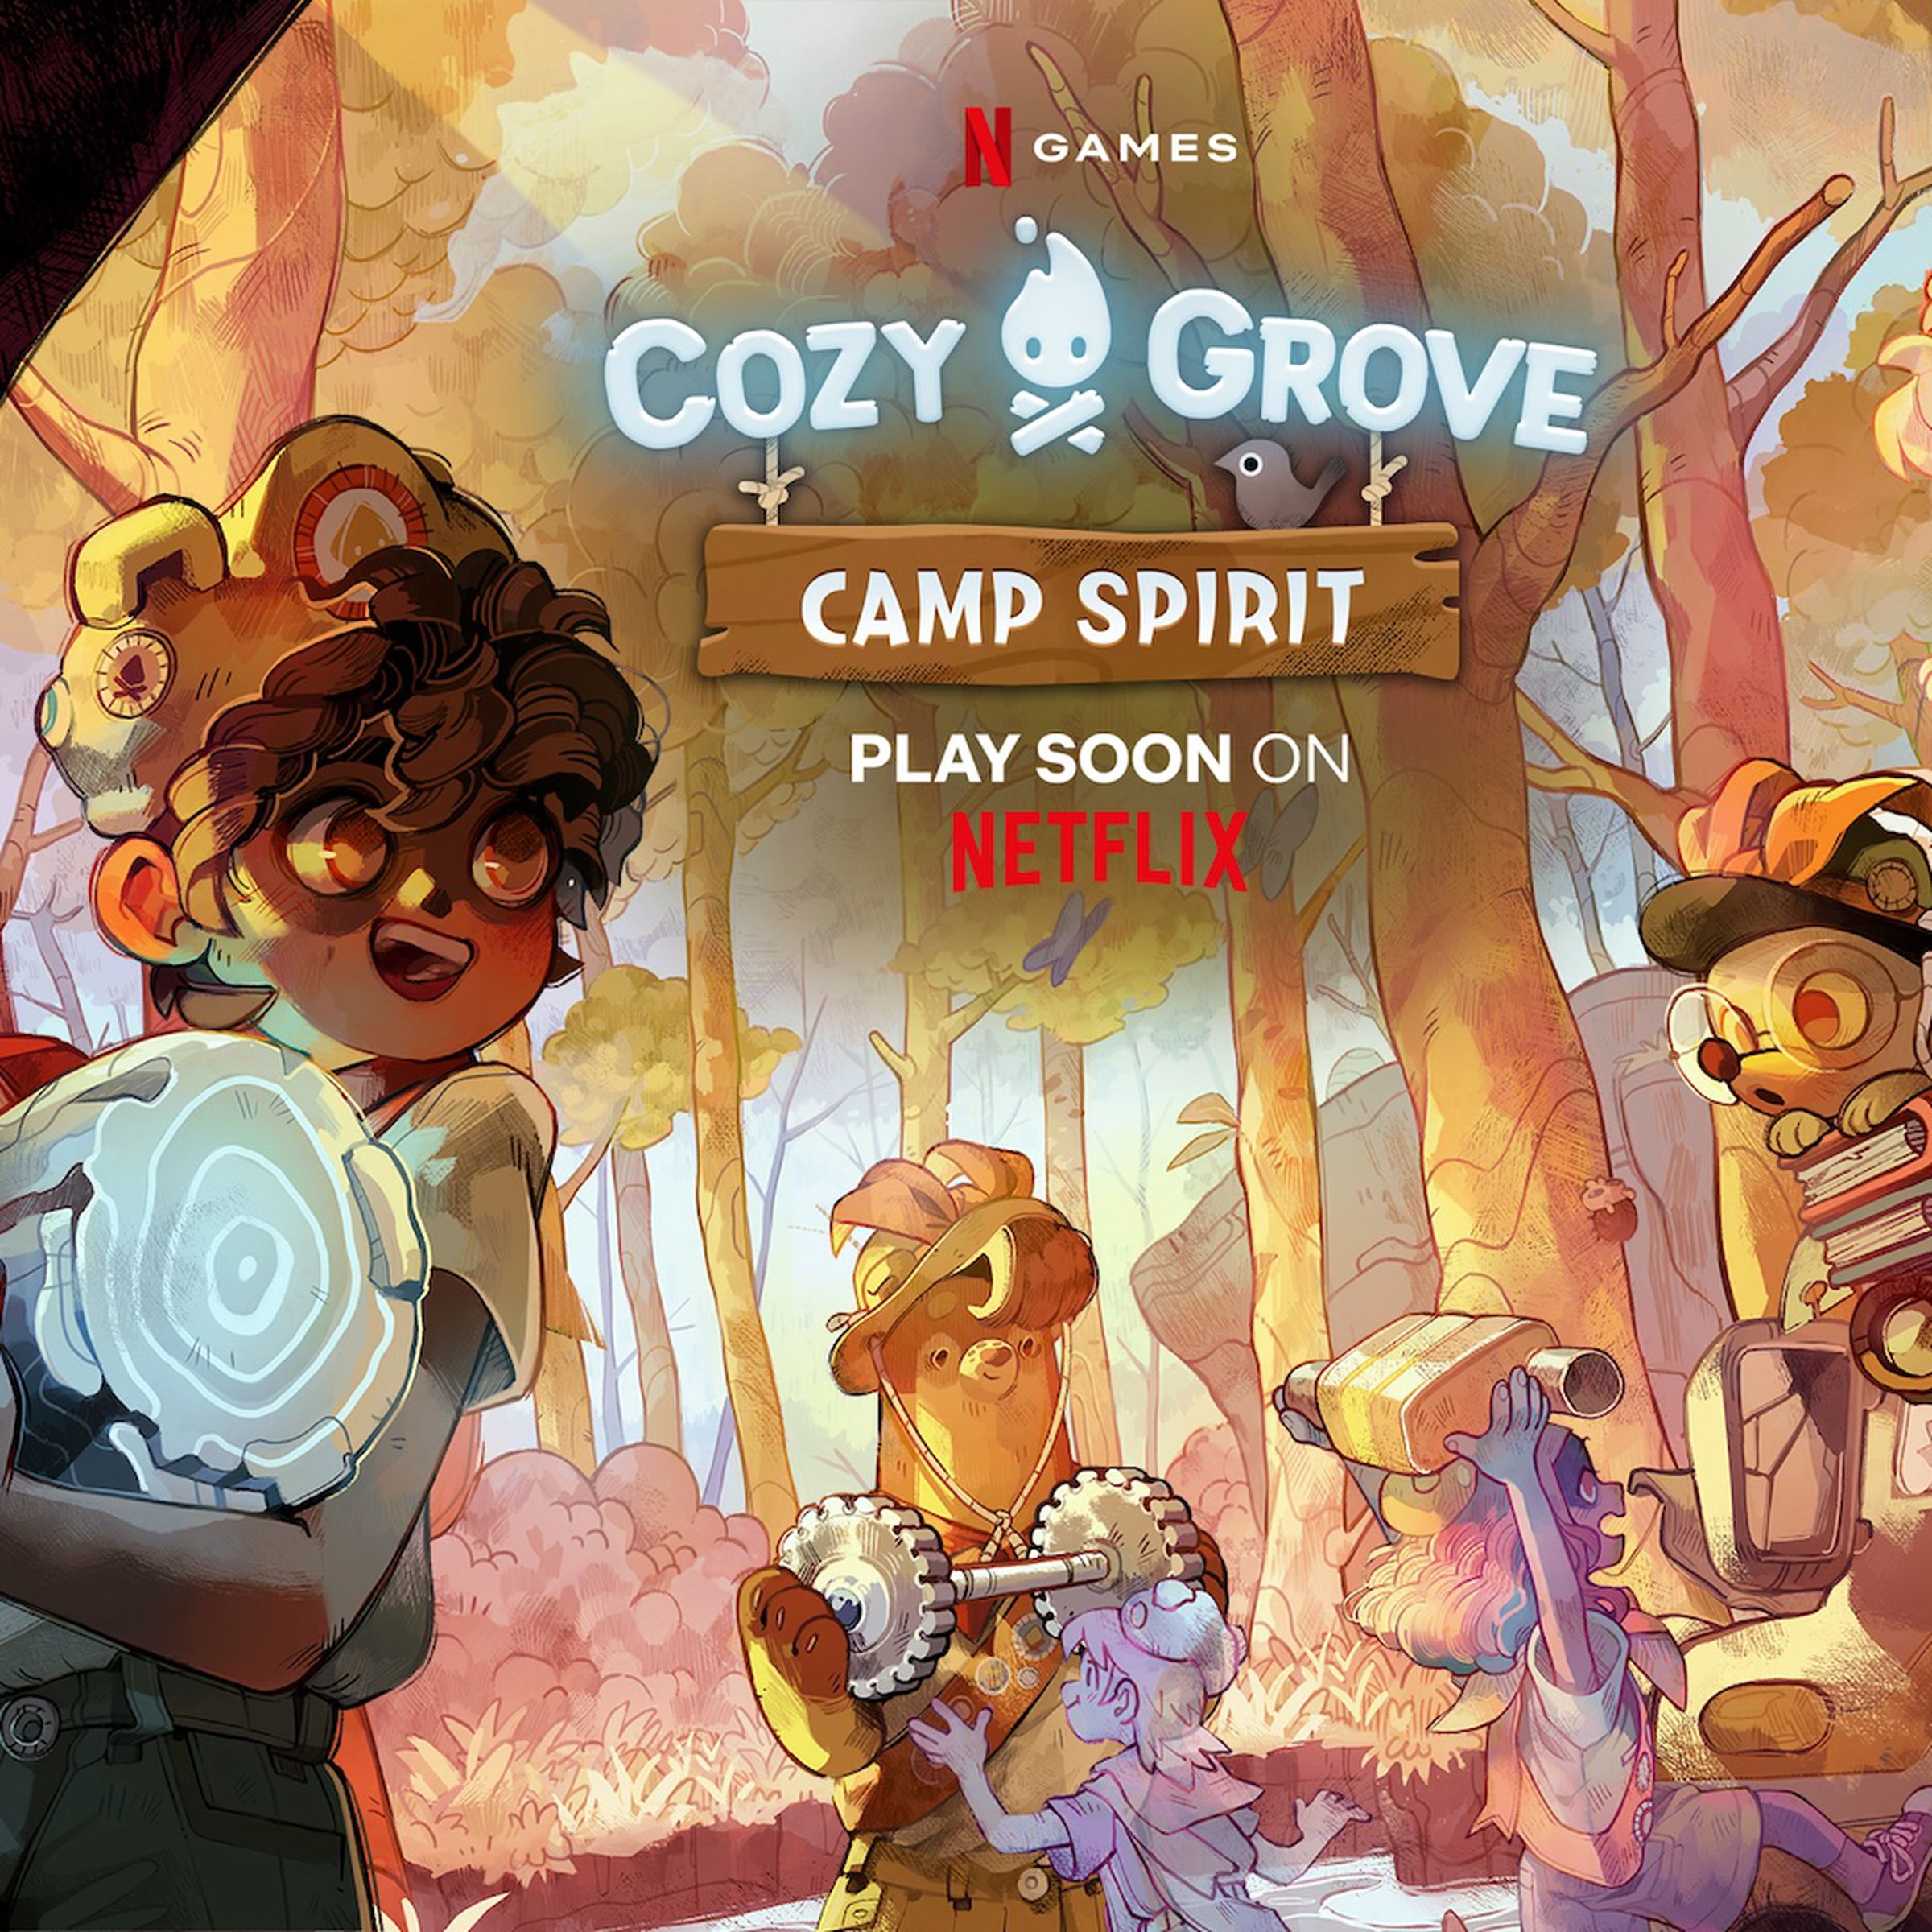 Key art from Cozy Grove: Camp Spirit featuring a human spirit scout carrying a ghostly white log of spirit wood in a forest environment with the Cozy Grove: Camp Spirit and Netflix logos in the center top of the image.